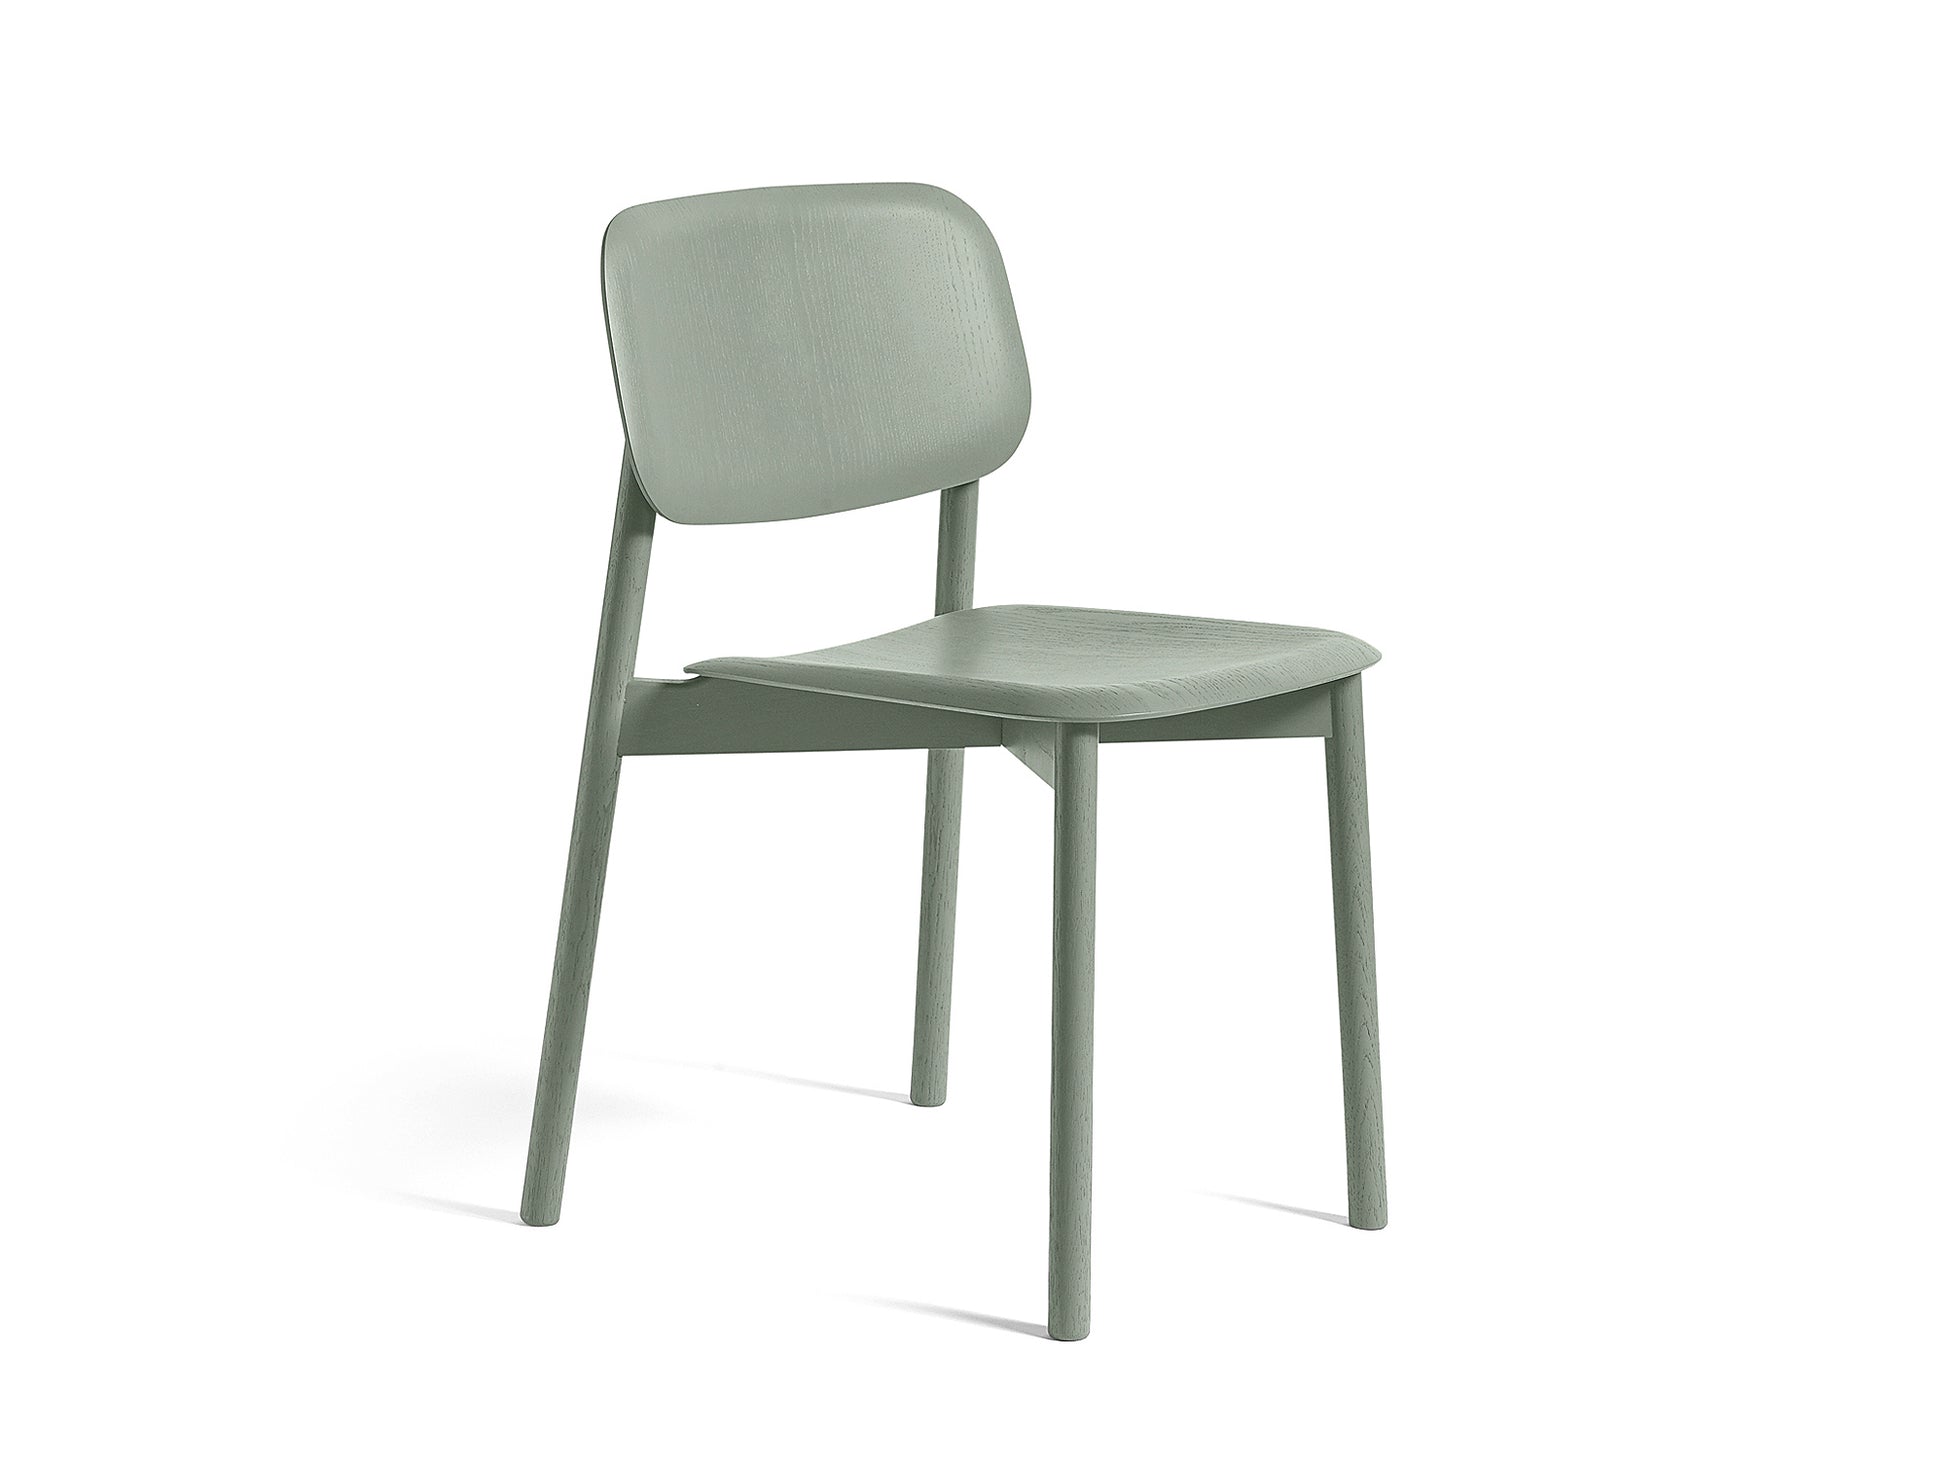 HAY Soft Edge 12 (Wood Dining Chair) - Dusty Green